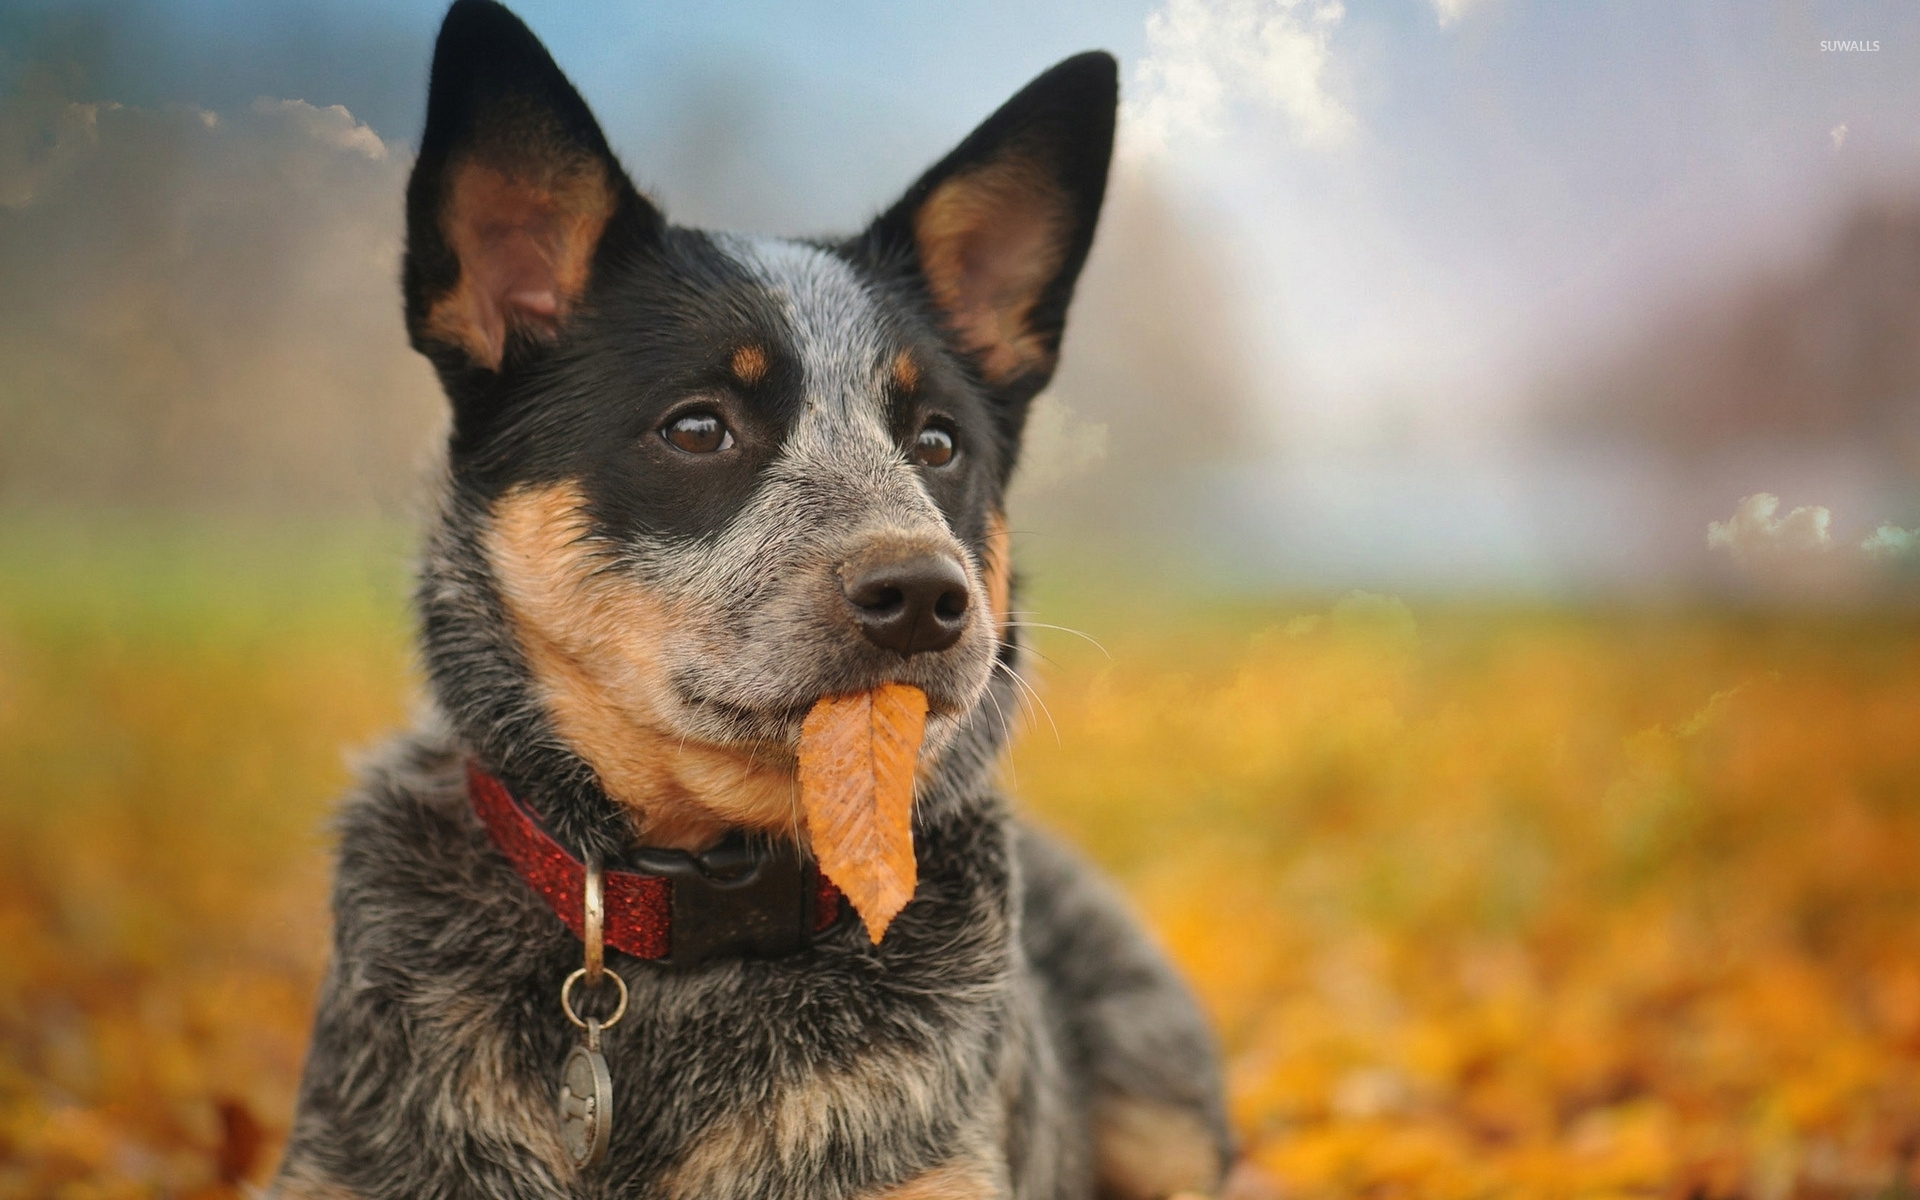 Australian Cattle Dog Wallpapers High Quality | Download Free